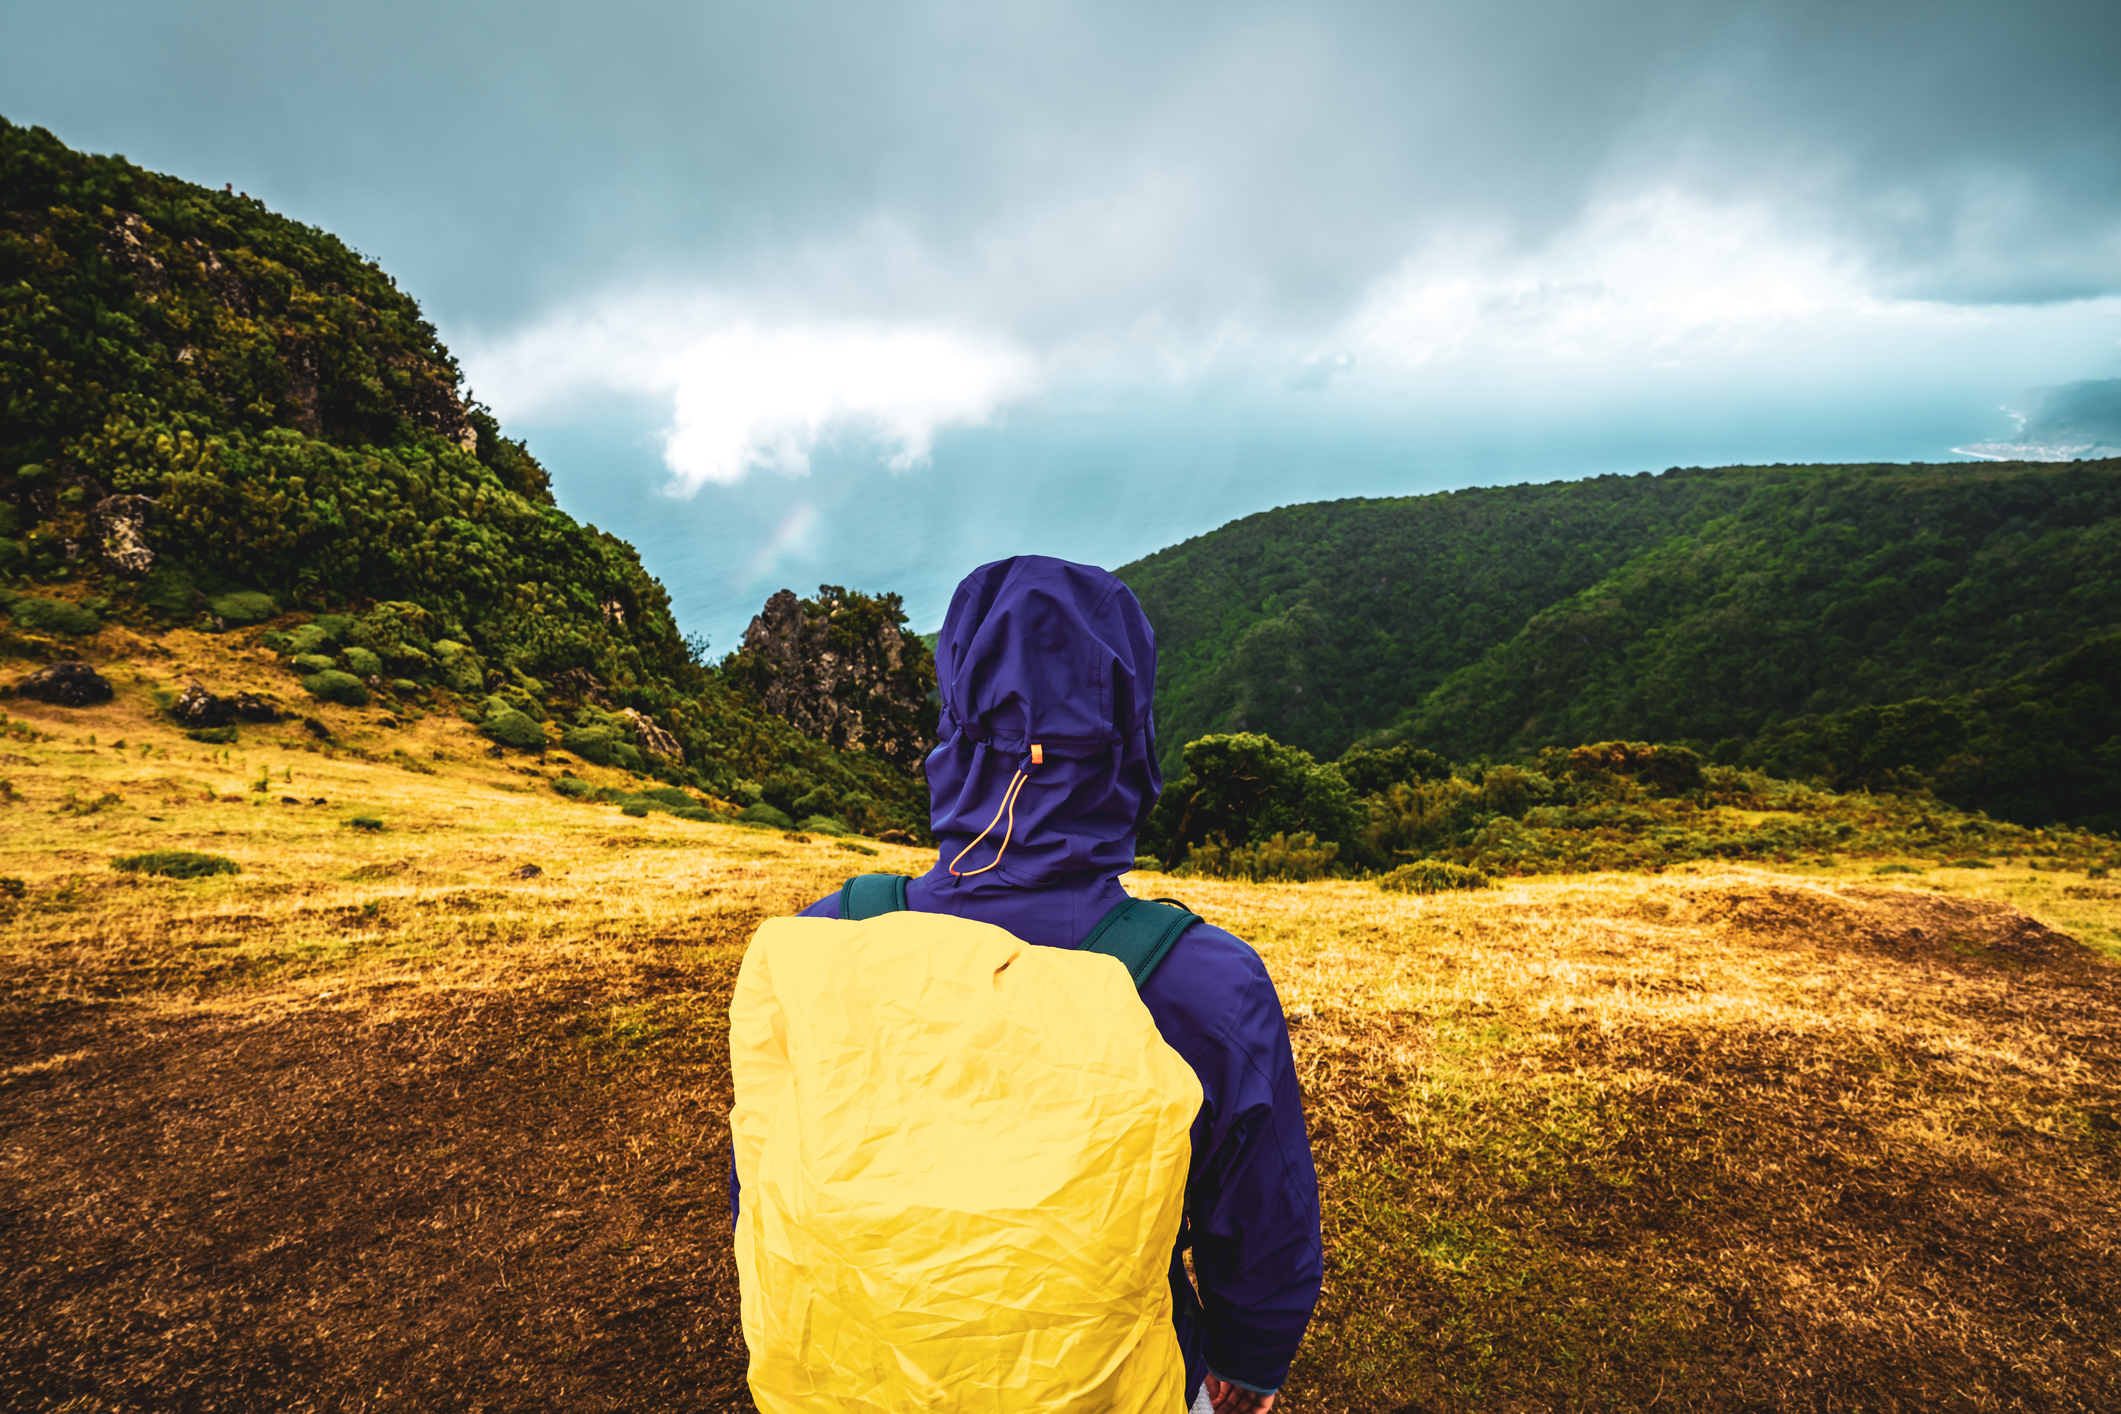 Description: Back view of a backpacker woman in rainproof clothing watching the sea from a grassy mountain top. Fanal Forest, Madeira Island, Portugal, Europe.